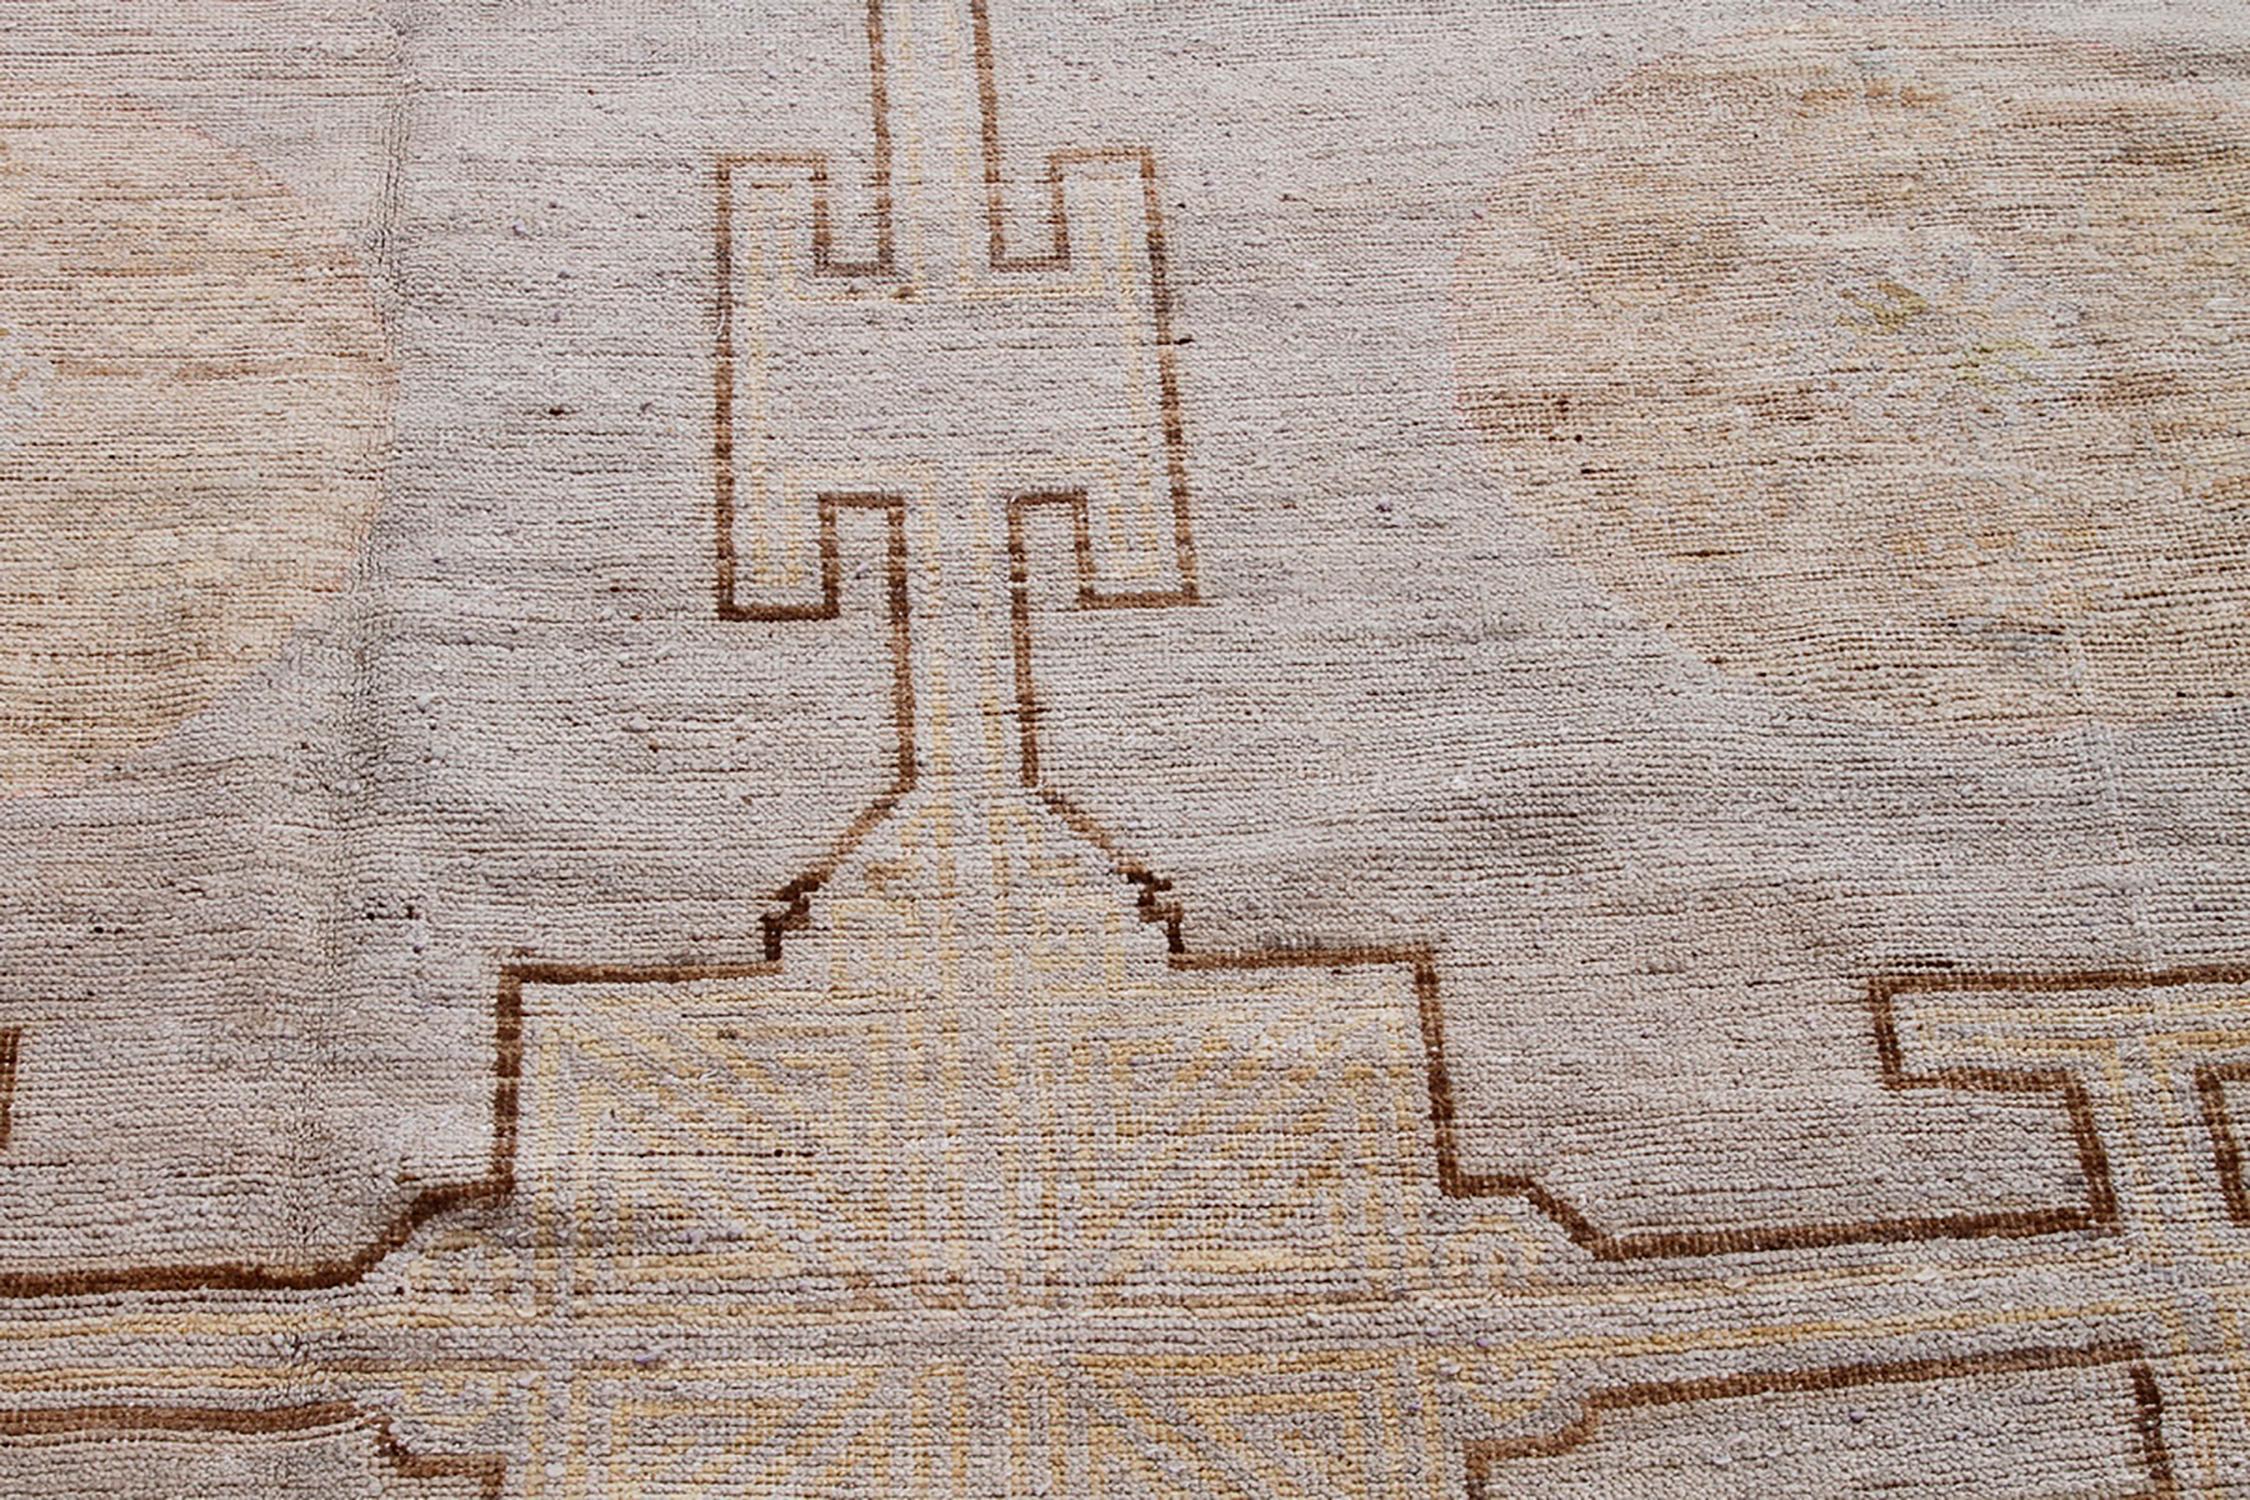 Hand-Knotted Rug & Kilim’s Khotan Style Rug in Beige-Brown and Blue Gray Geometric Pattern